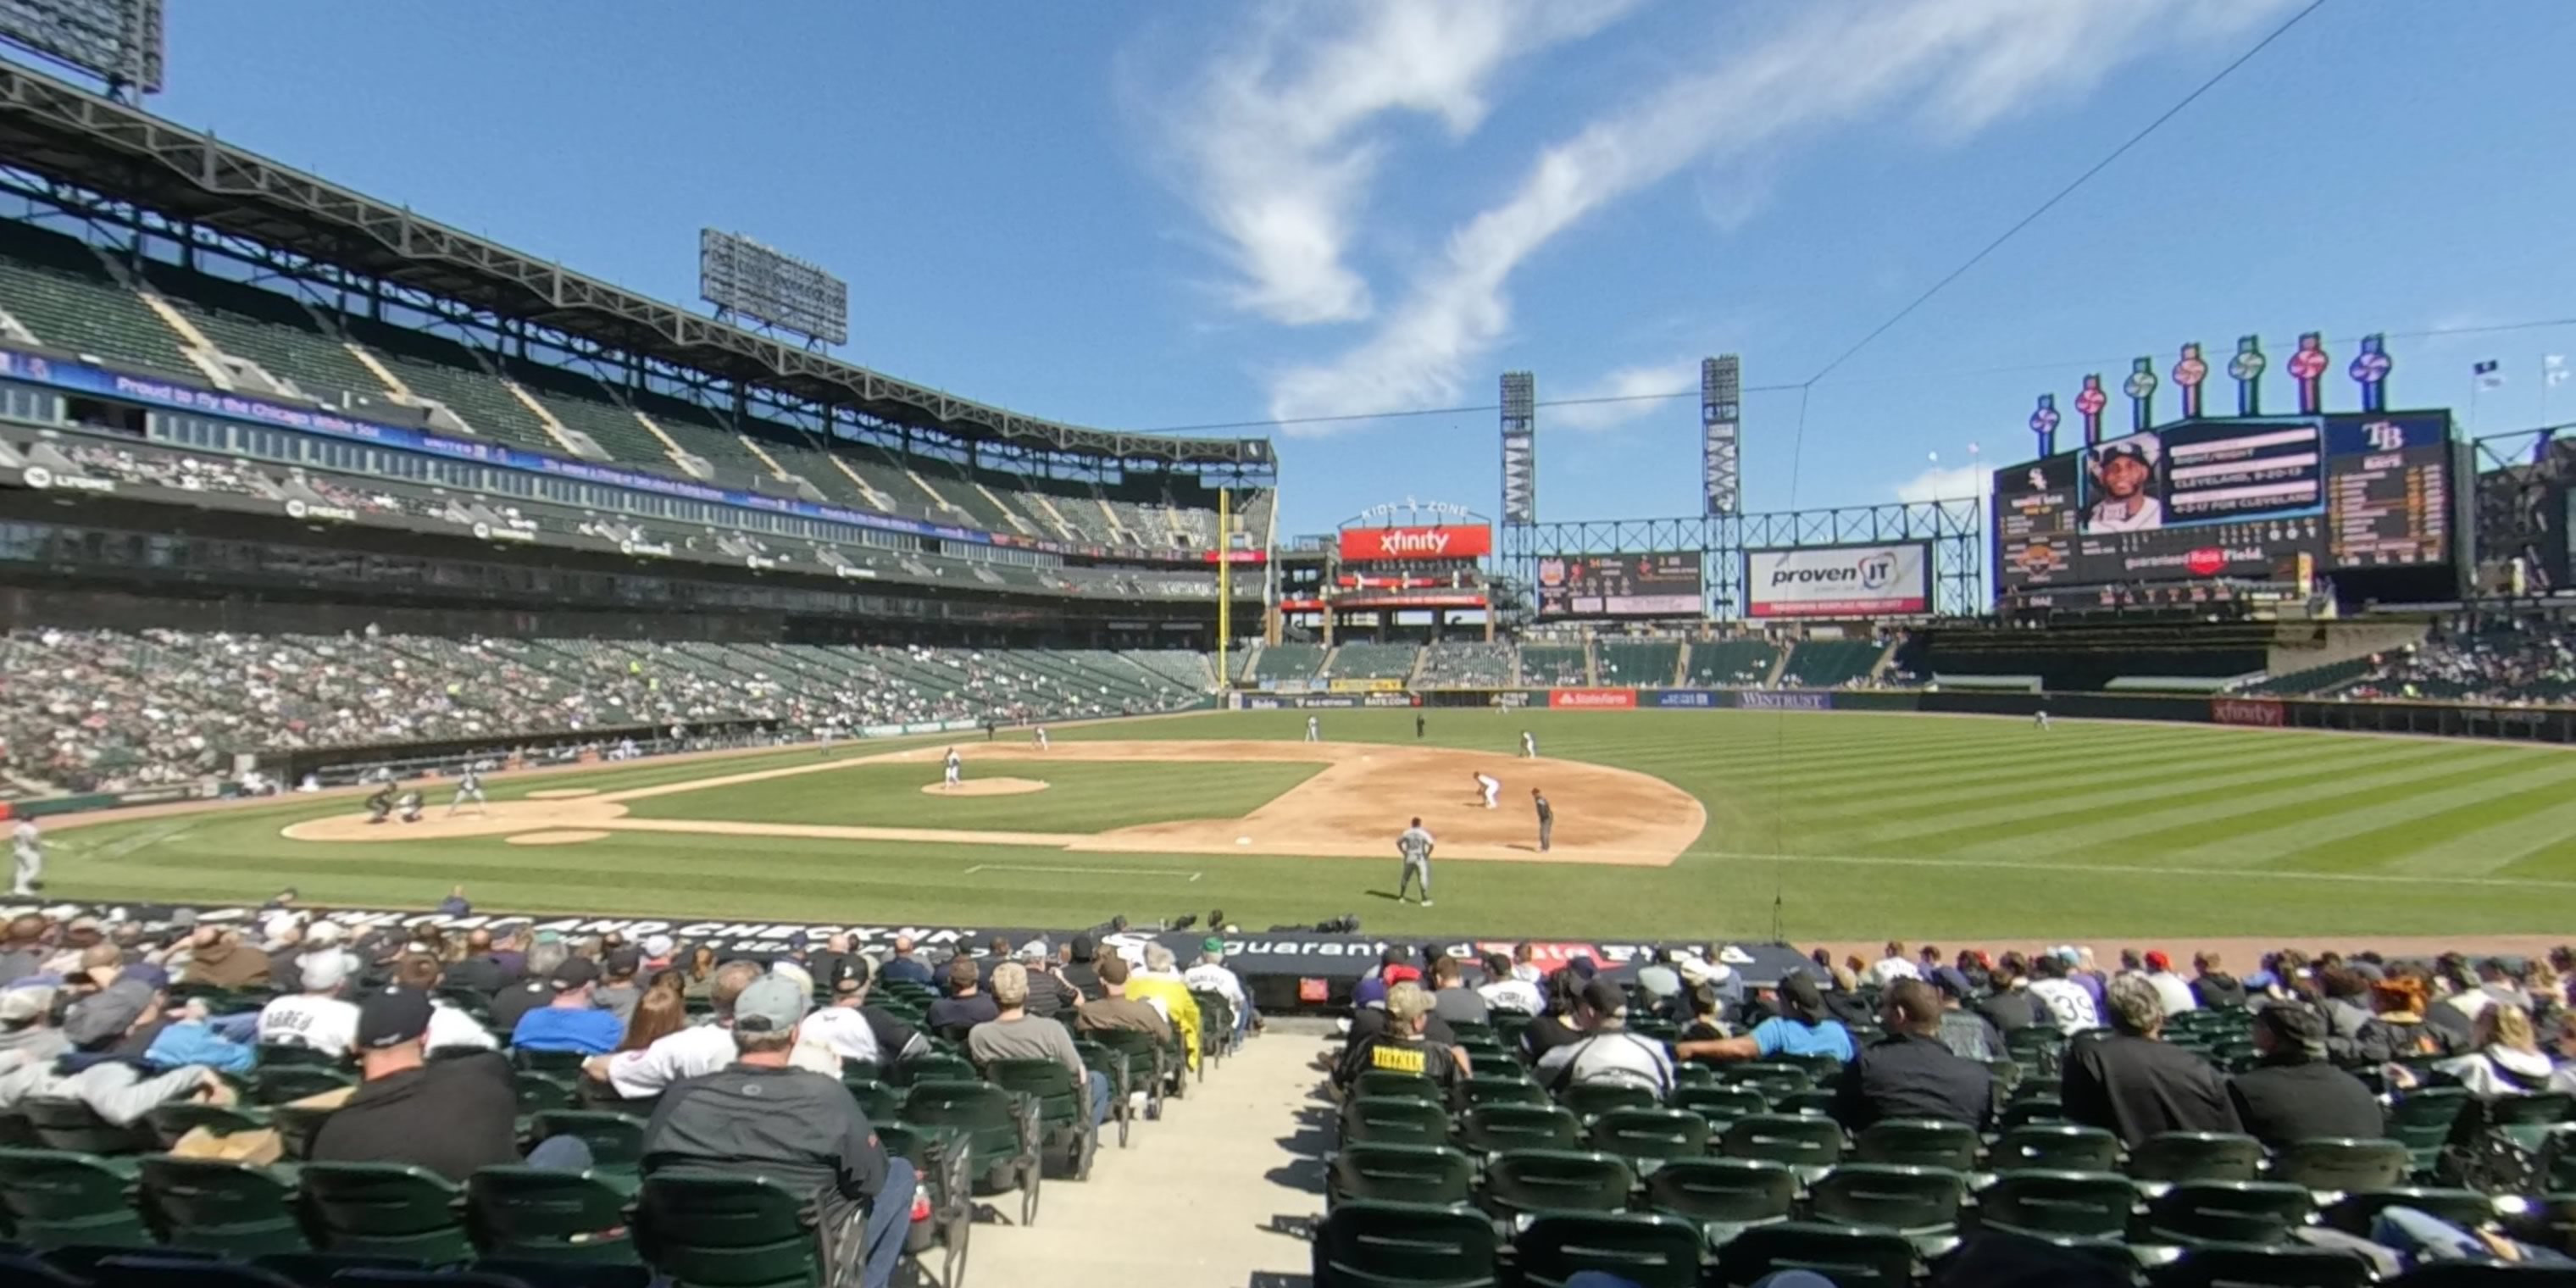 section 122 panoramic seat view  - guaranteed rate field